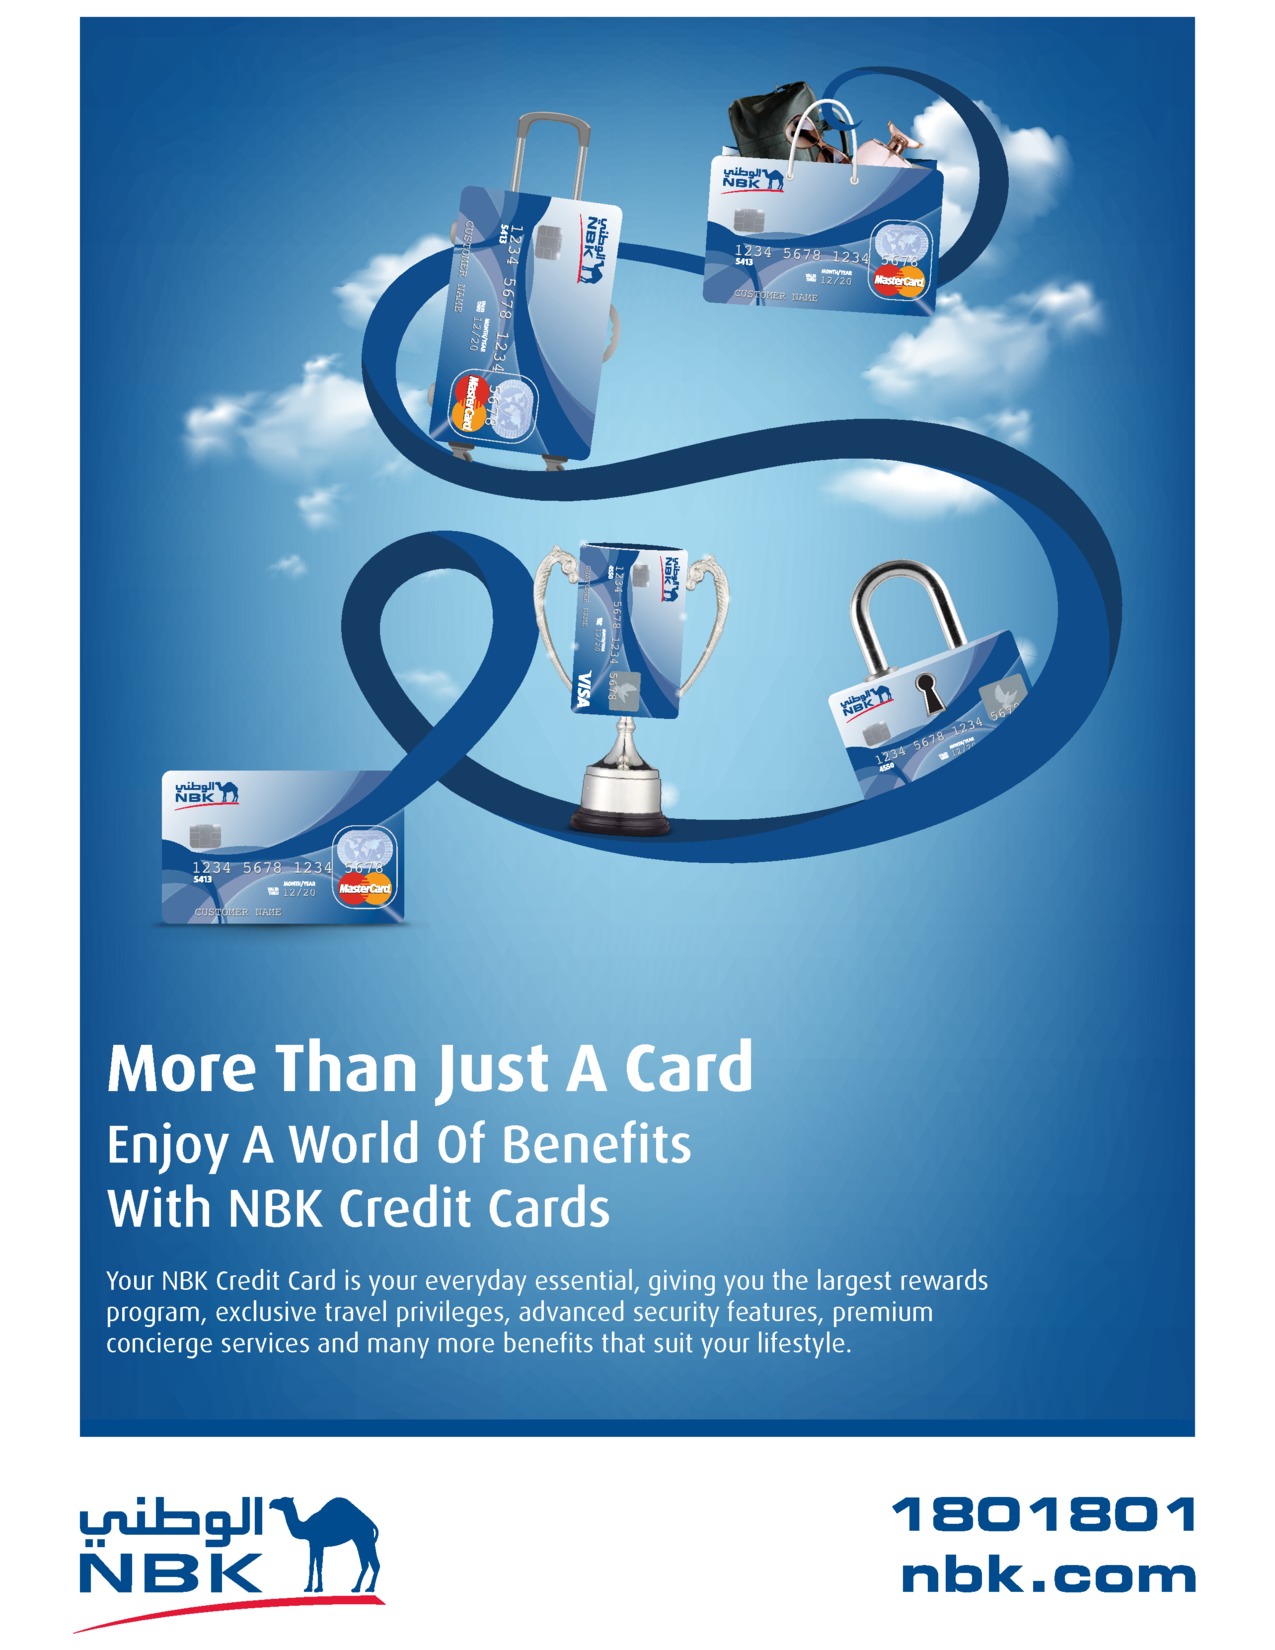 enjoy-a-world-of-benefits-with-nbk-credit-cards in kuwait